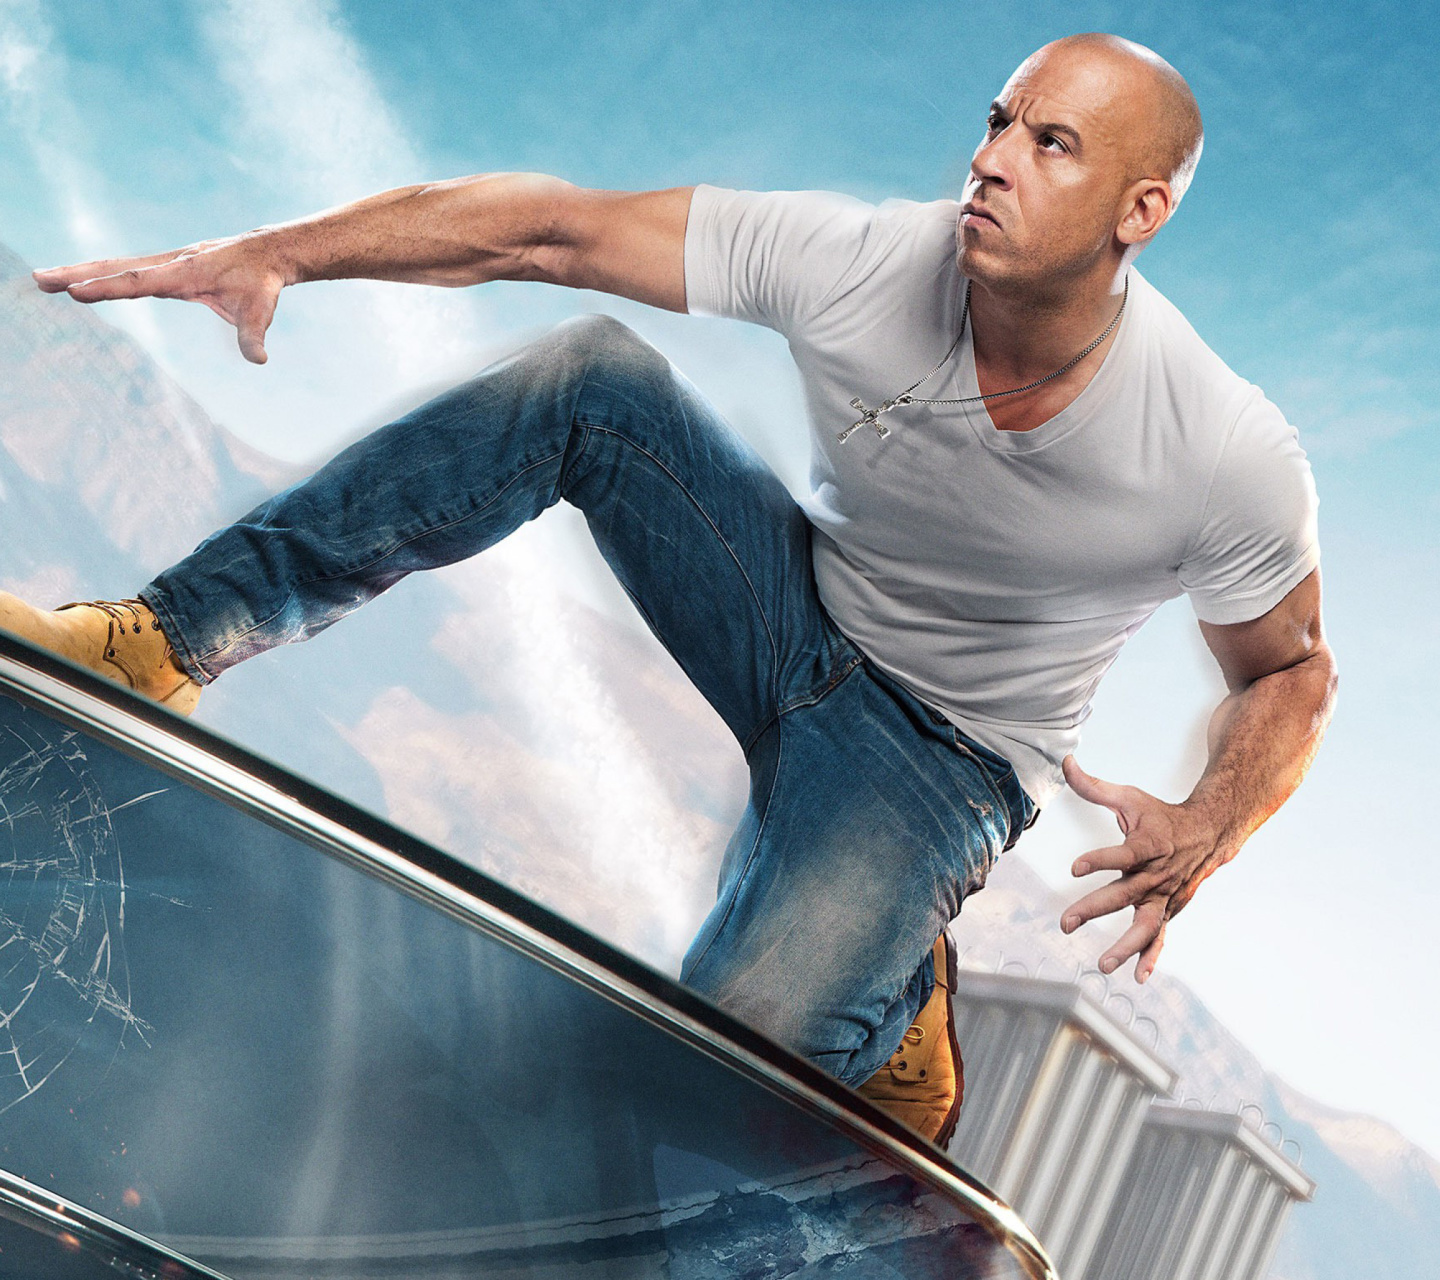 Fast & Furious Supercharged Poster with Vin Diesel screenshot #1 1440x1280